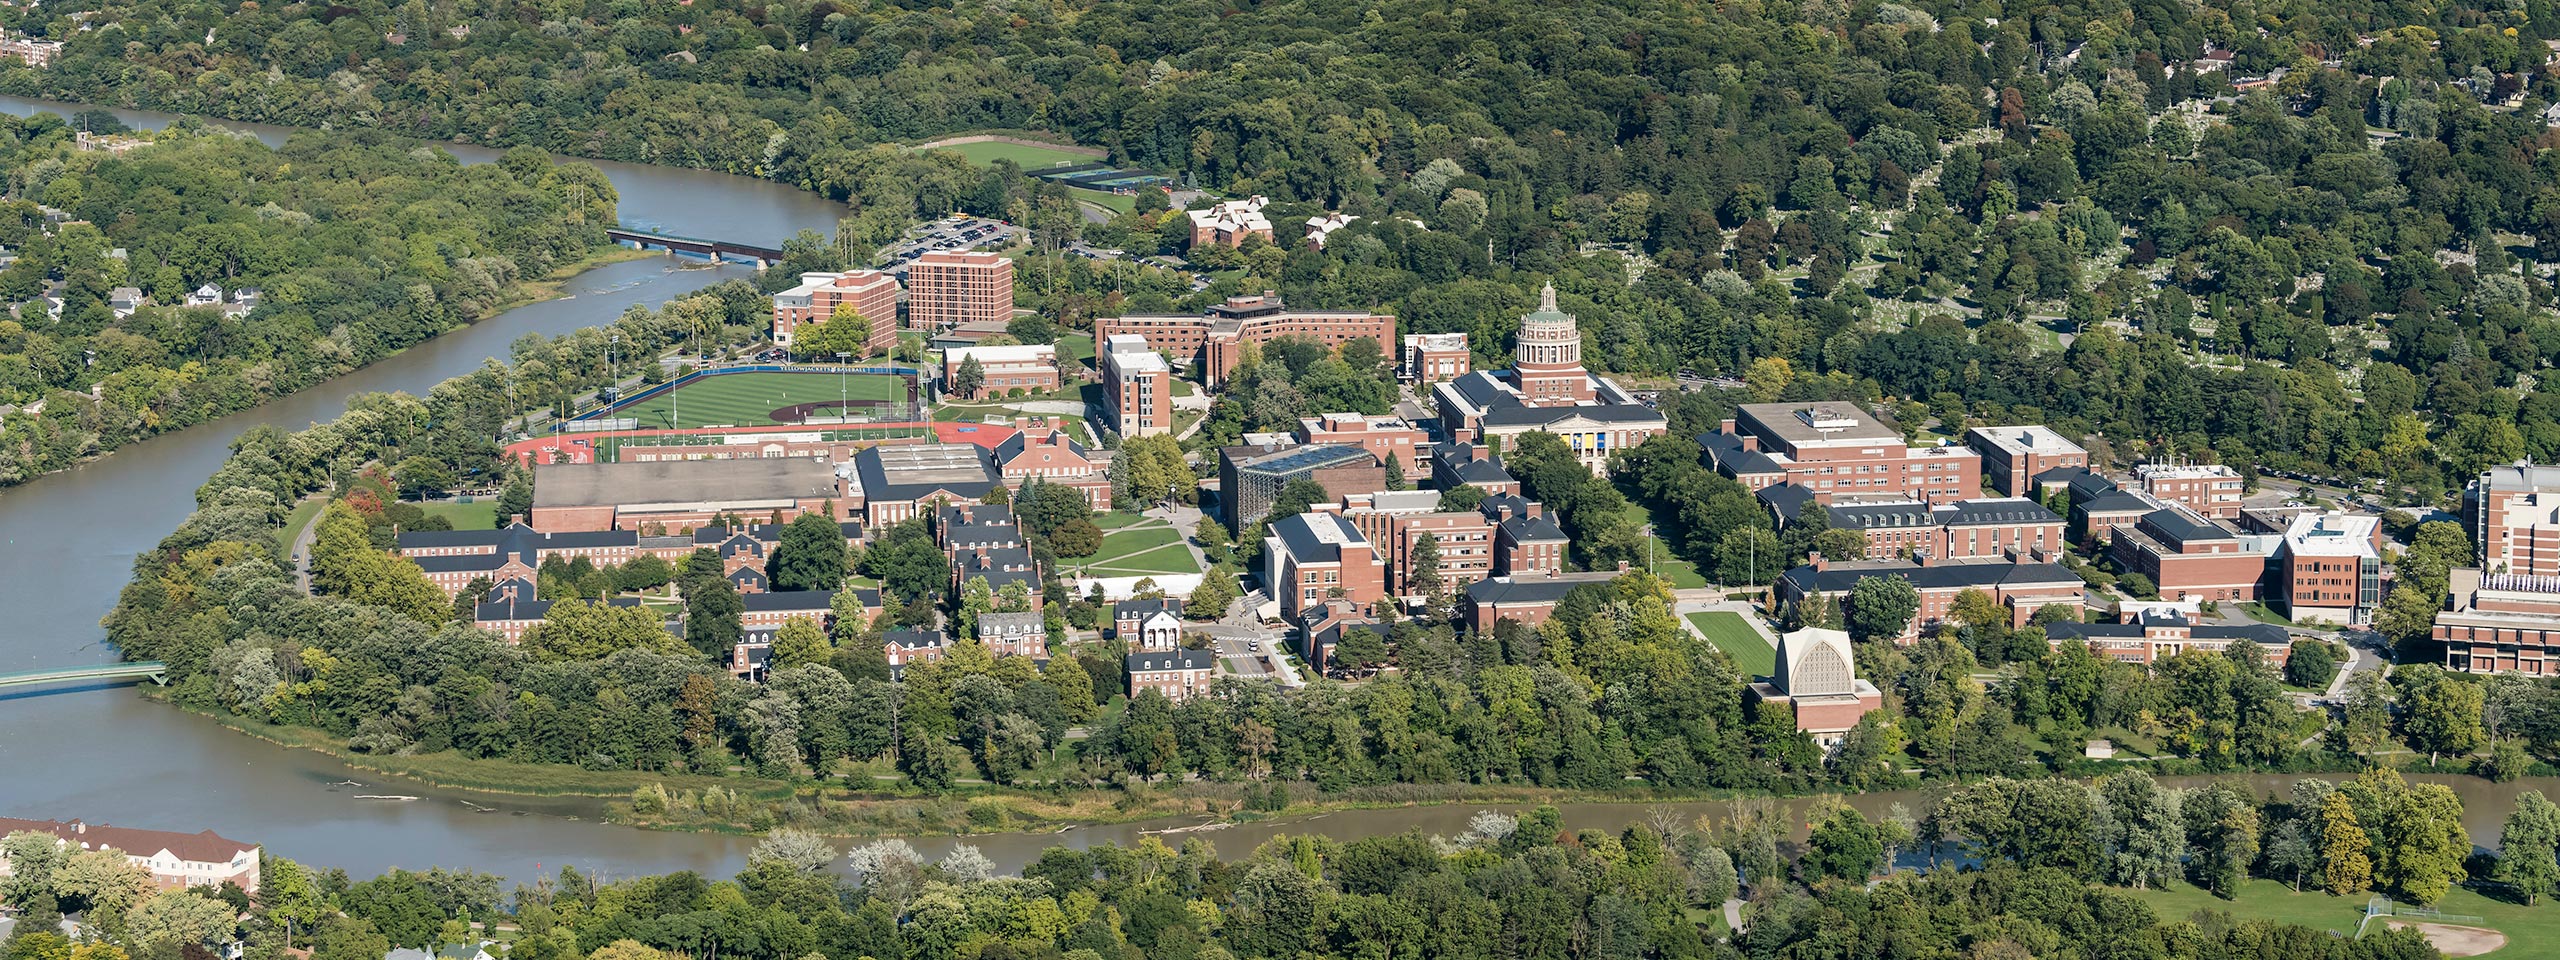 An aerial view of the University of Rochester River Campus.